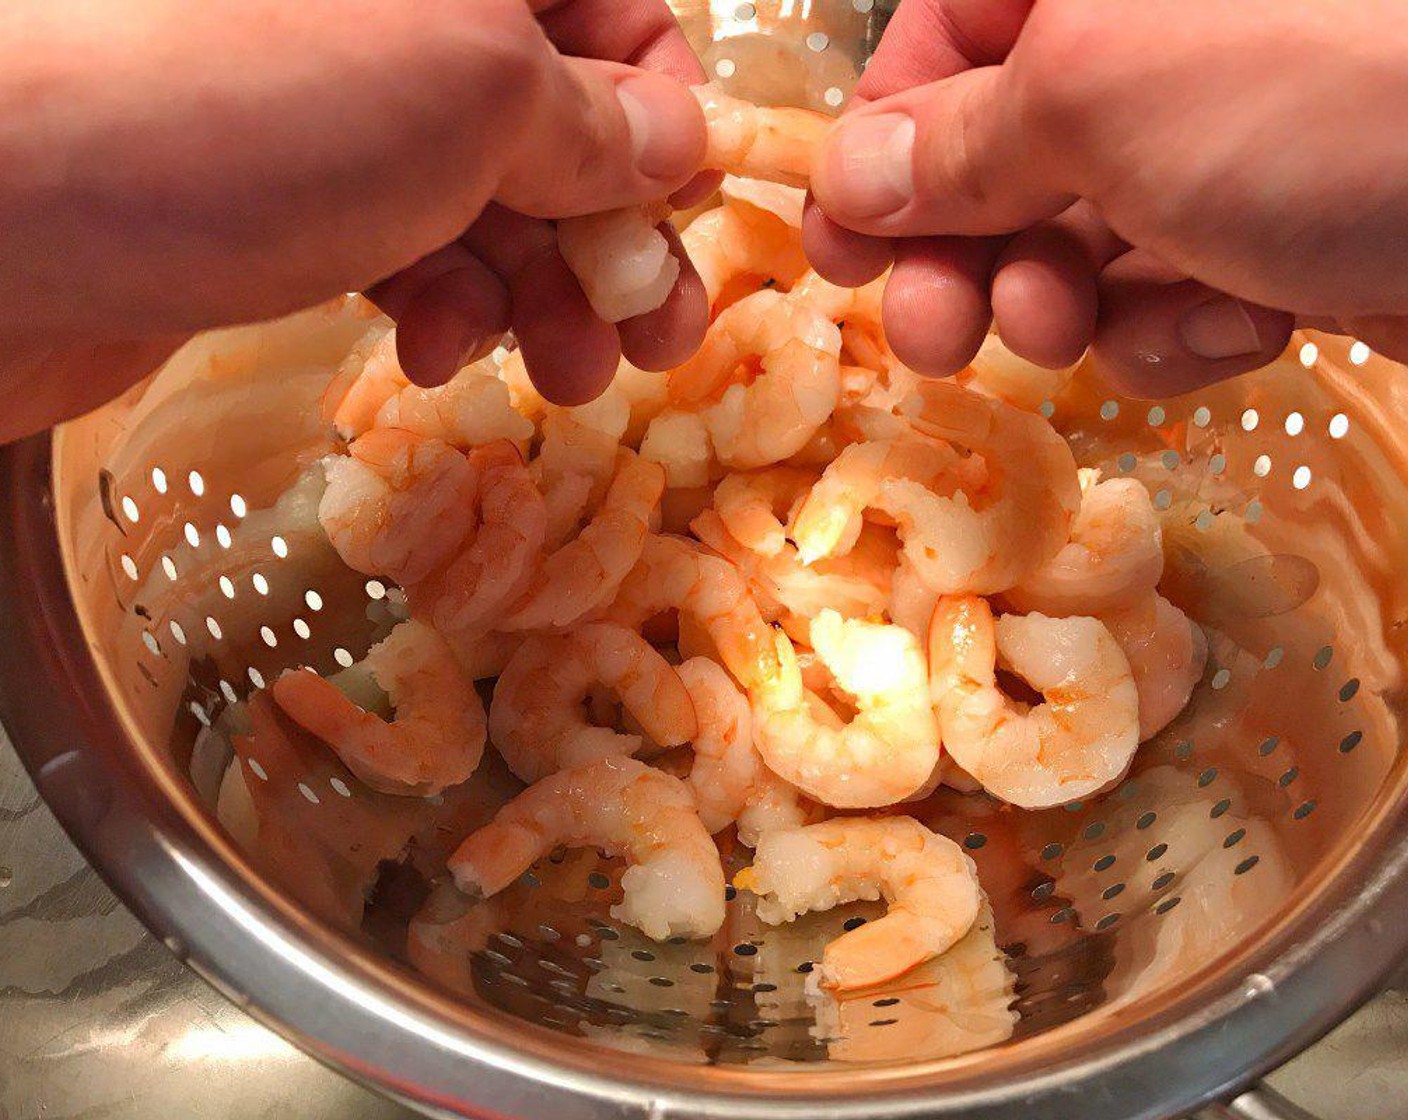 step 1 Prepare Medium Shrimp (6 oz) ahead of time. Peel shrimp and rinse in a colander under cold water. Drain and then place in a plastic bag in the refrigerator until ready to cook.